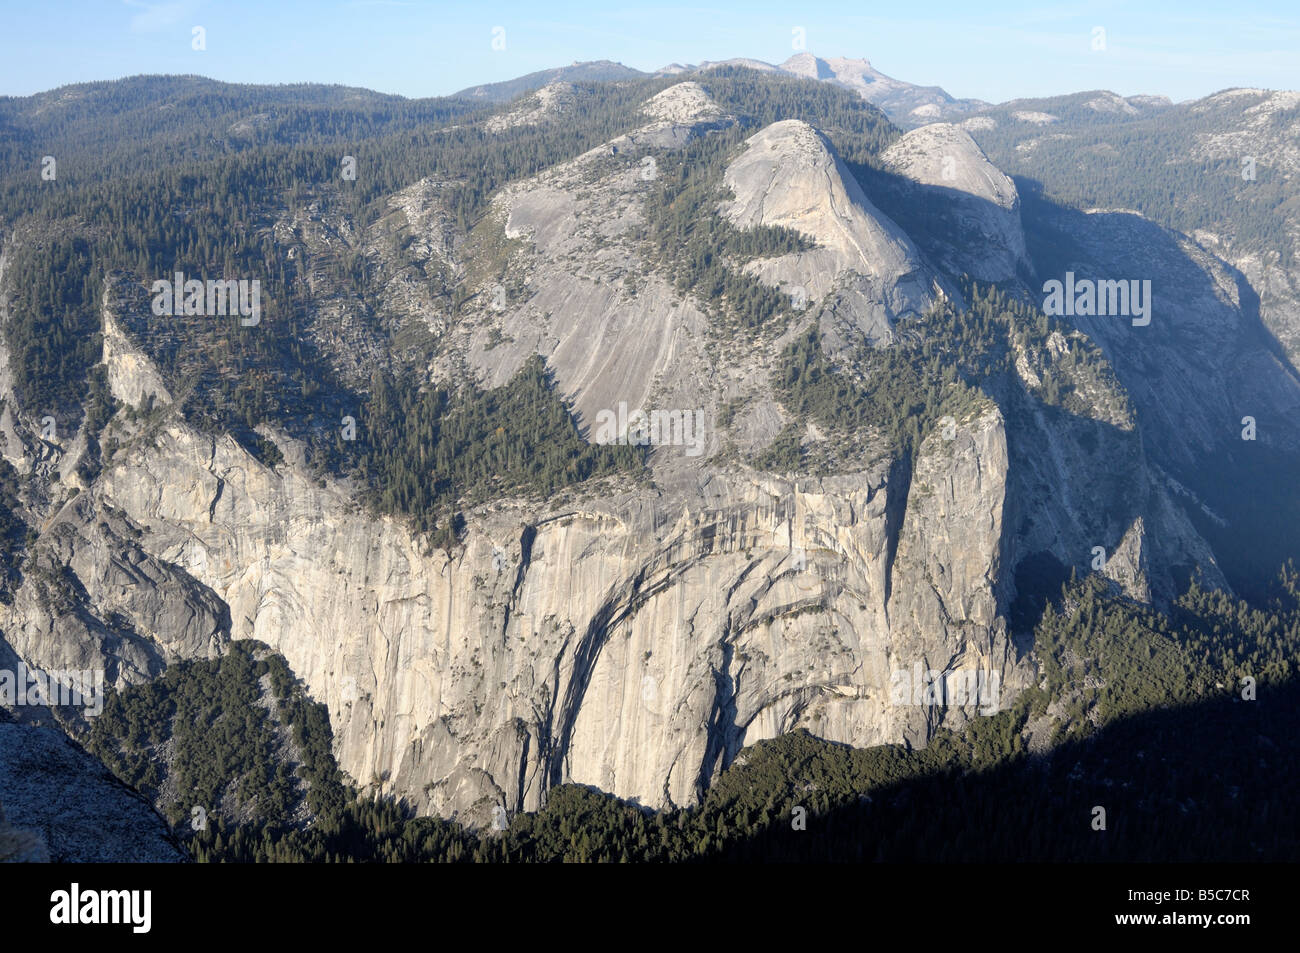 The view from Glacier Point across Yosemite Valley to North Dome and Royal Arches. Yosemite National Park, California USA. Stock Photo